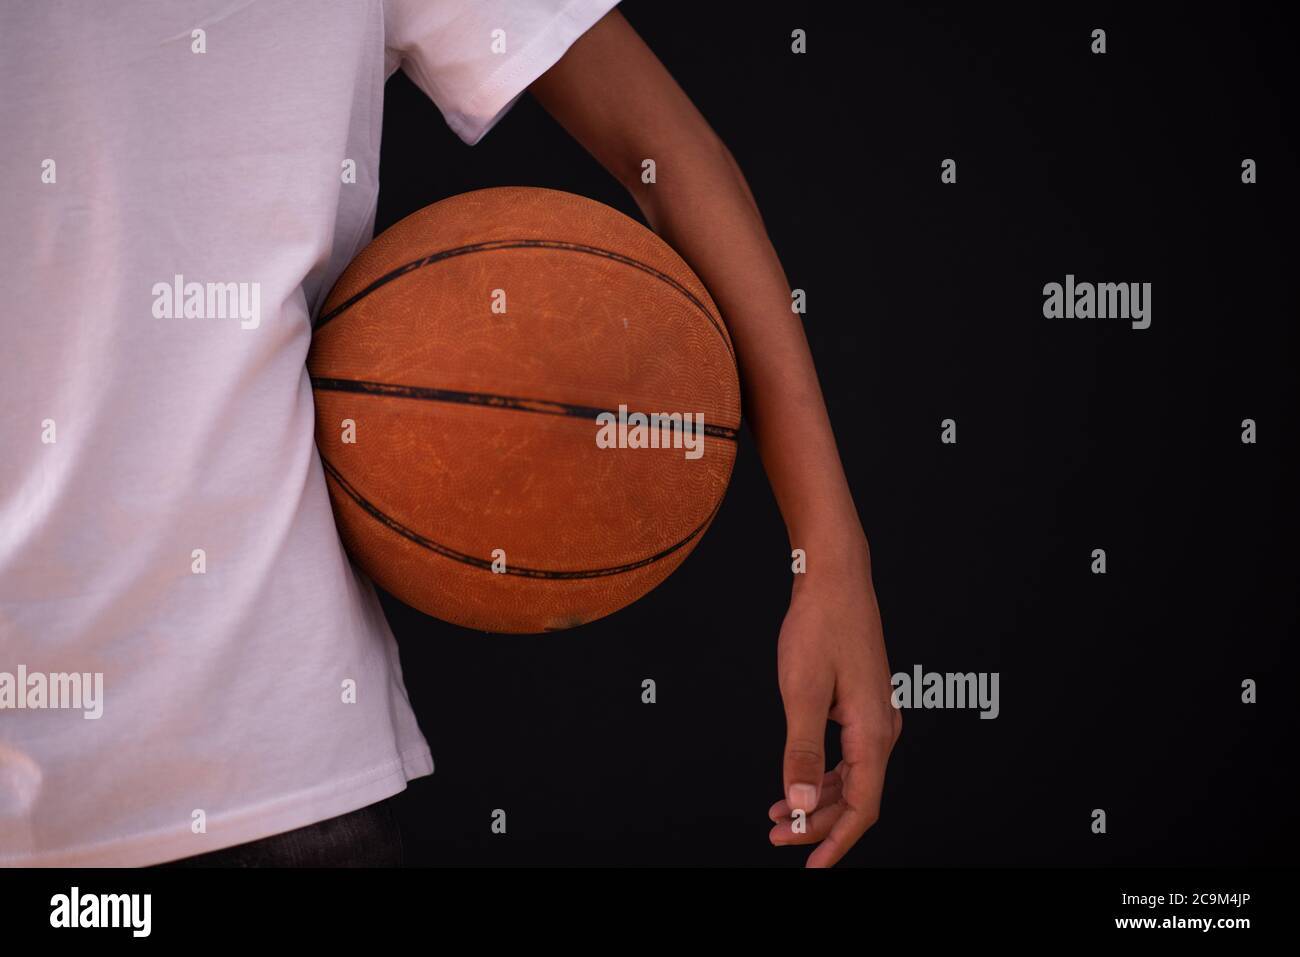 Young person standing with basketball under his arm Stock Photo